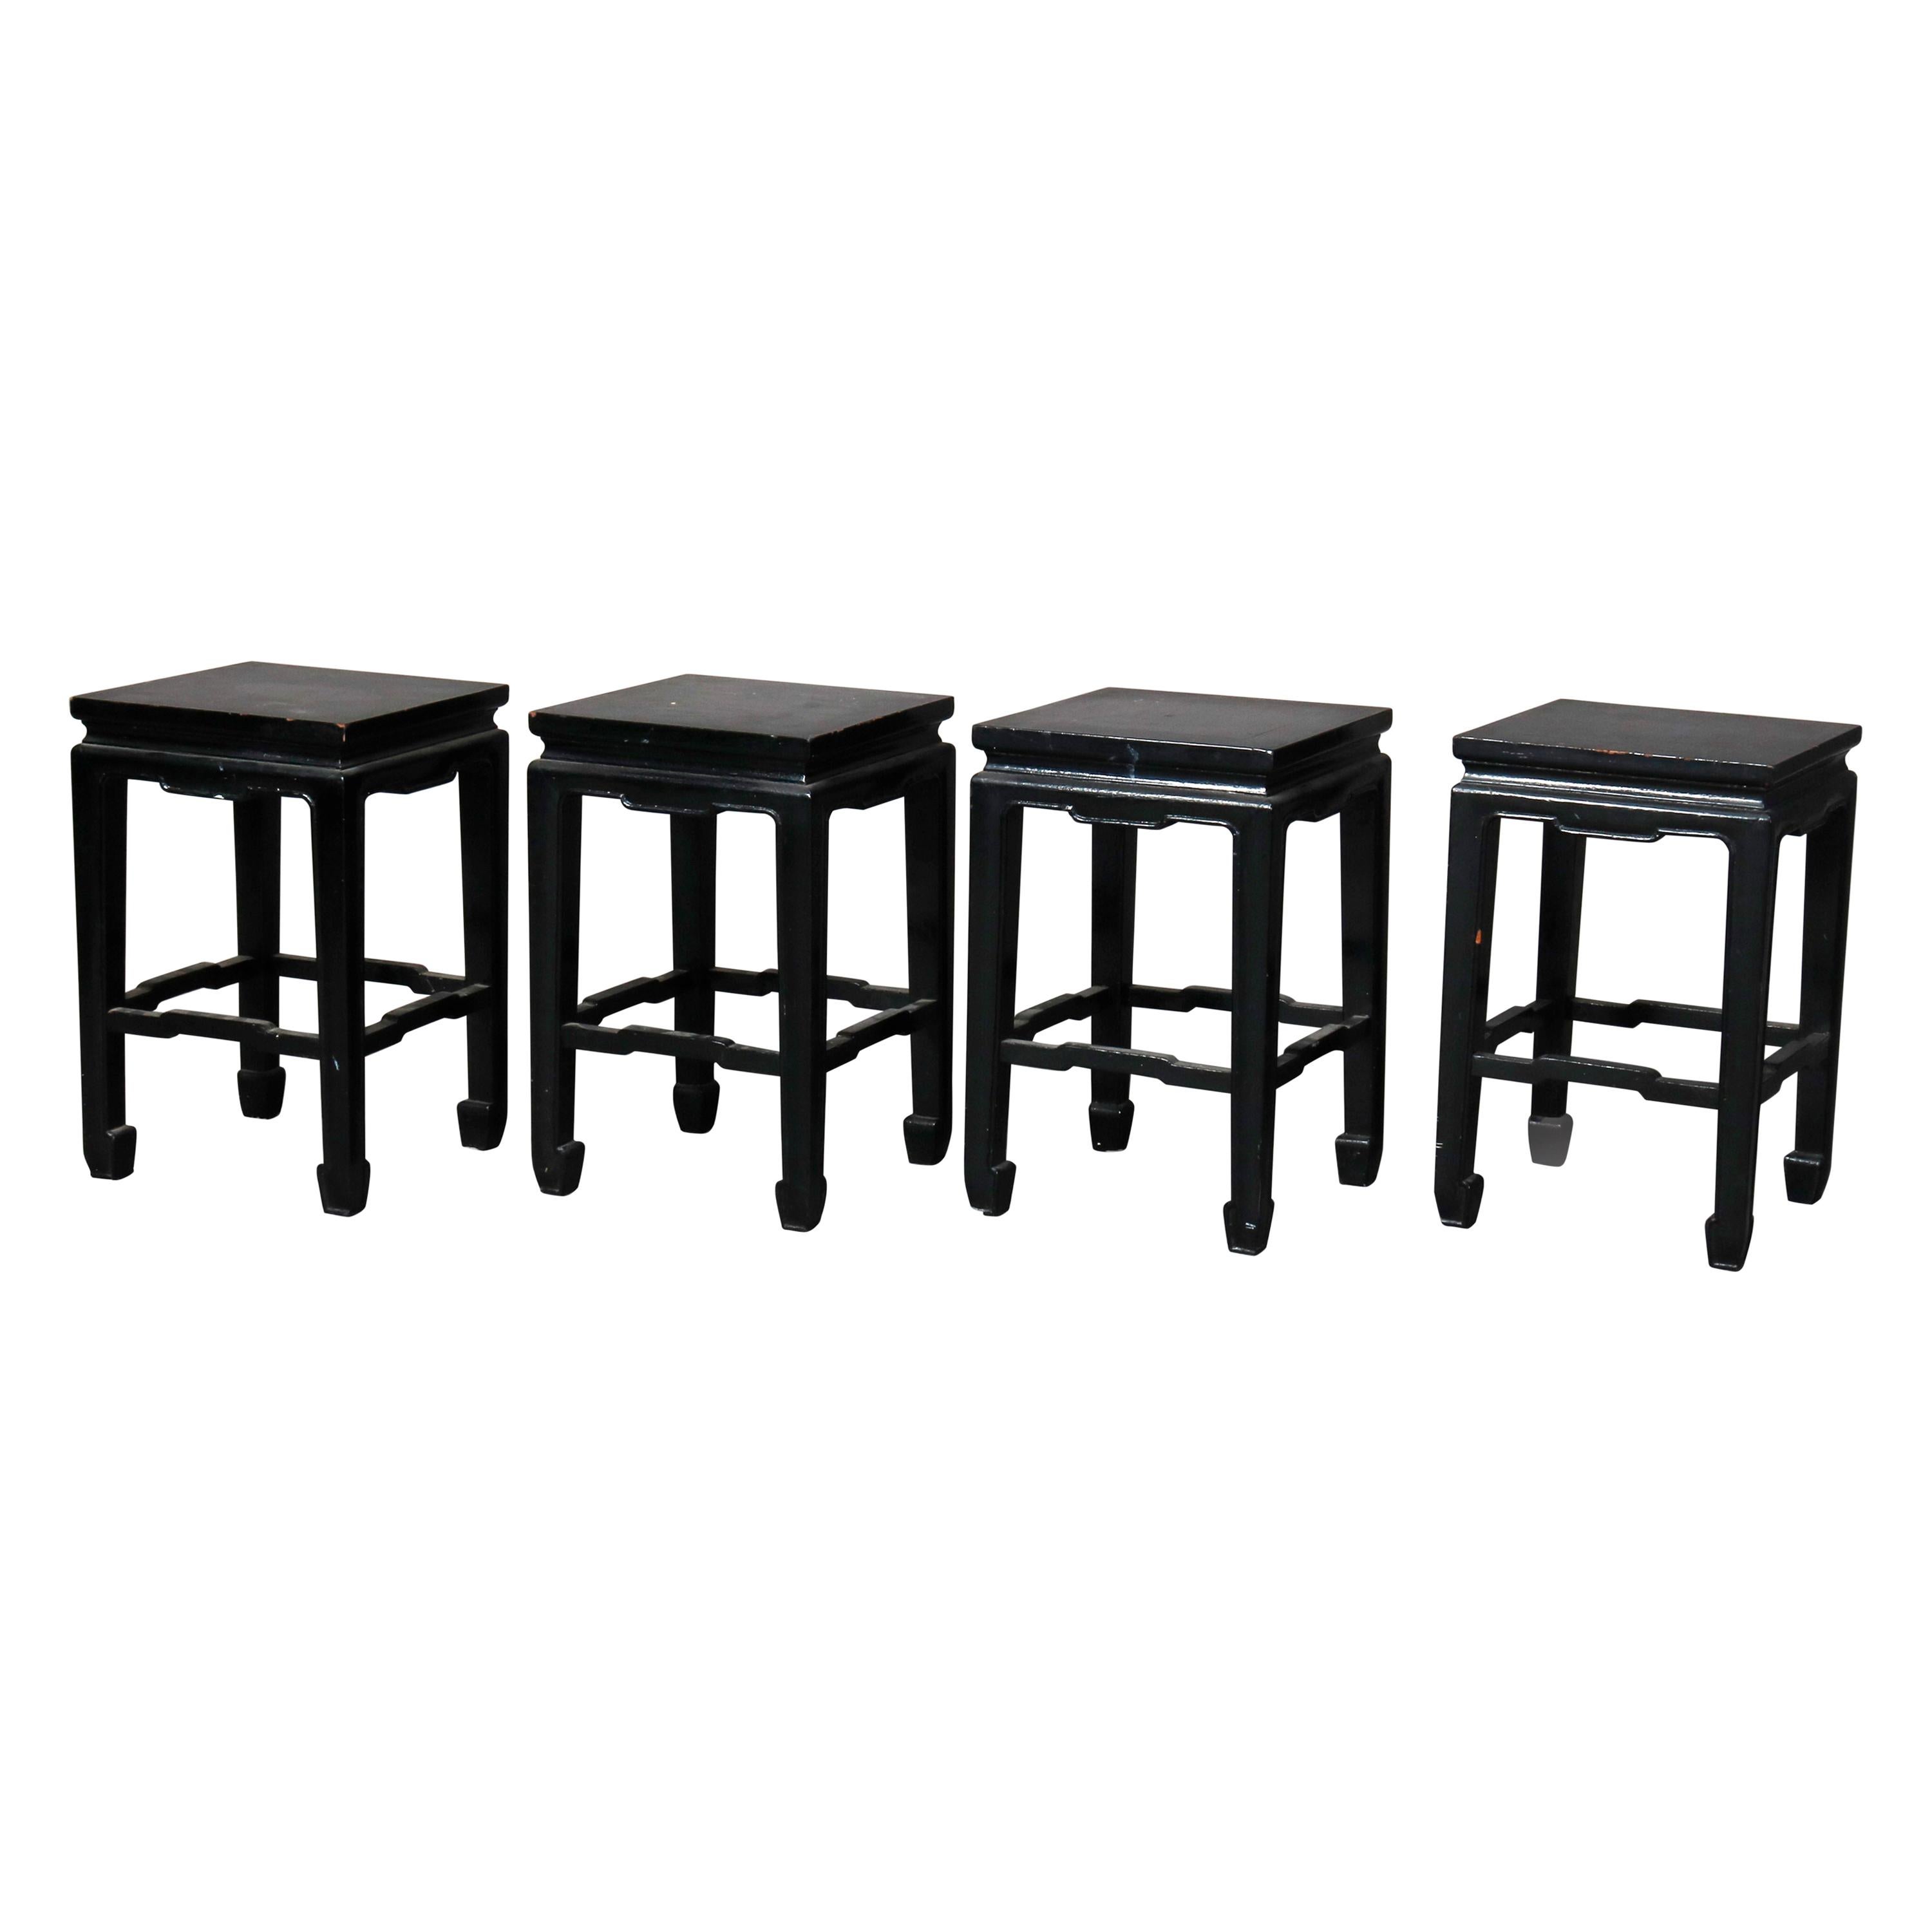 Set of Four Vintage Black Lacquered Chinese Side Stands, 20th Century